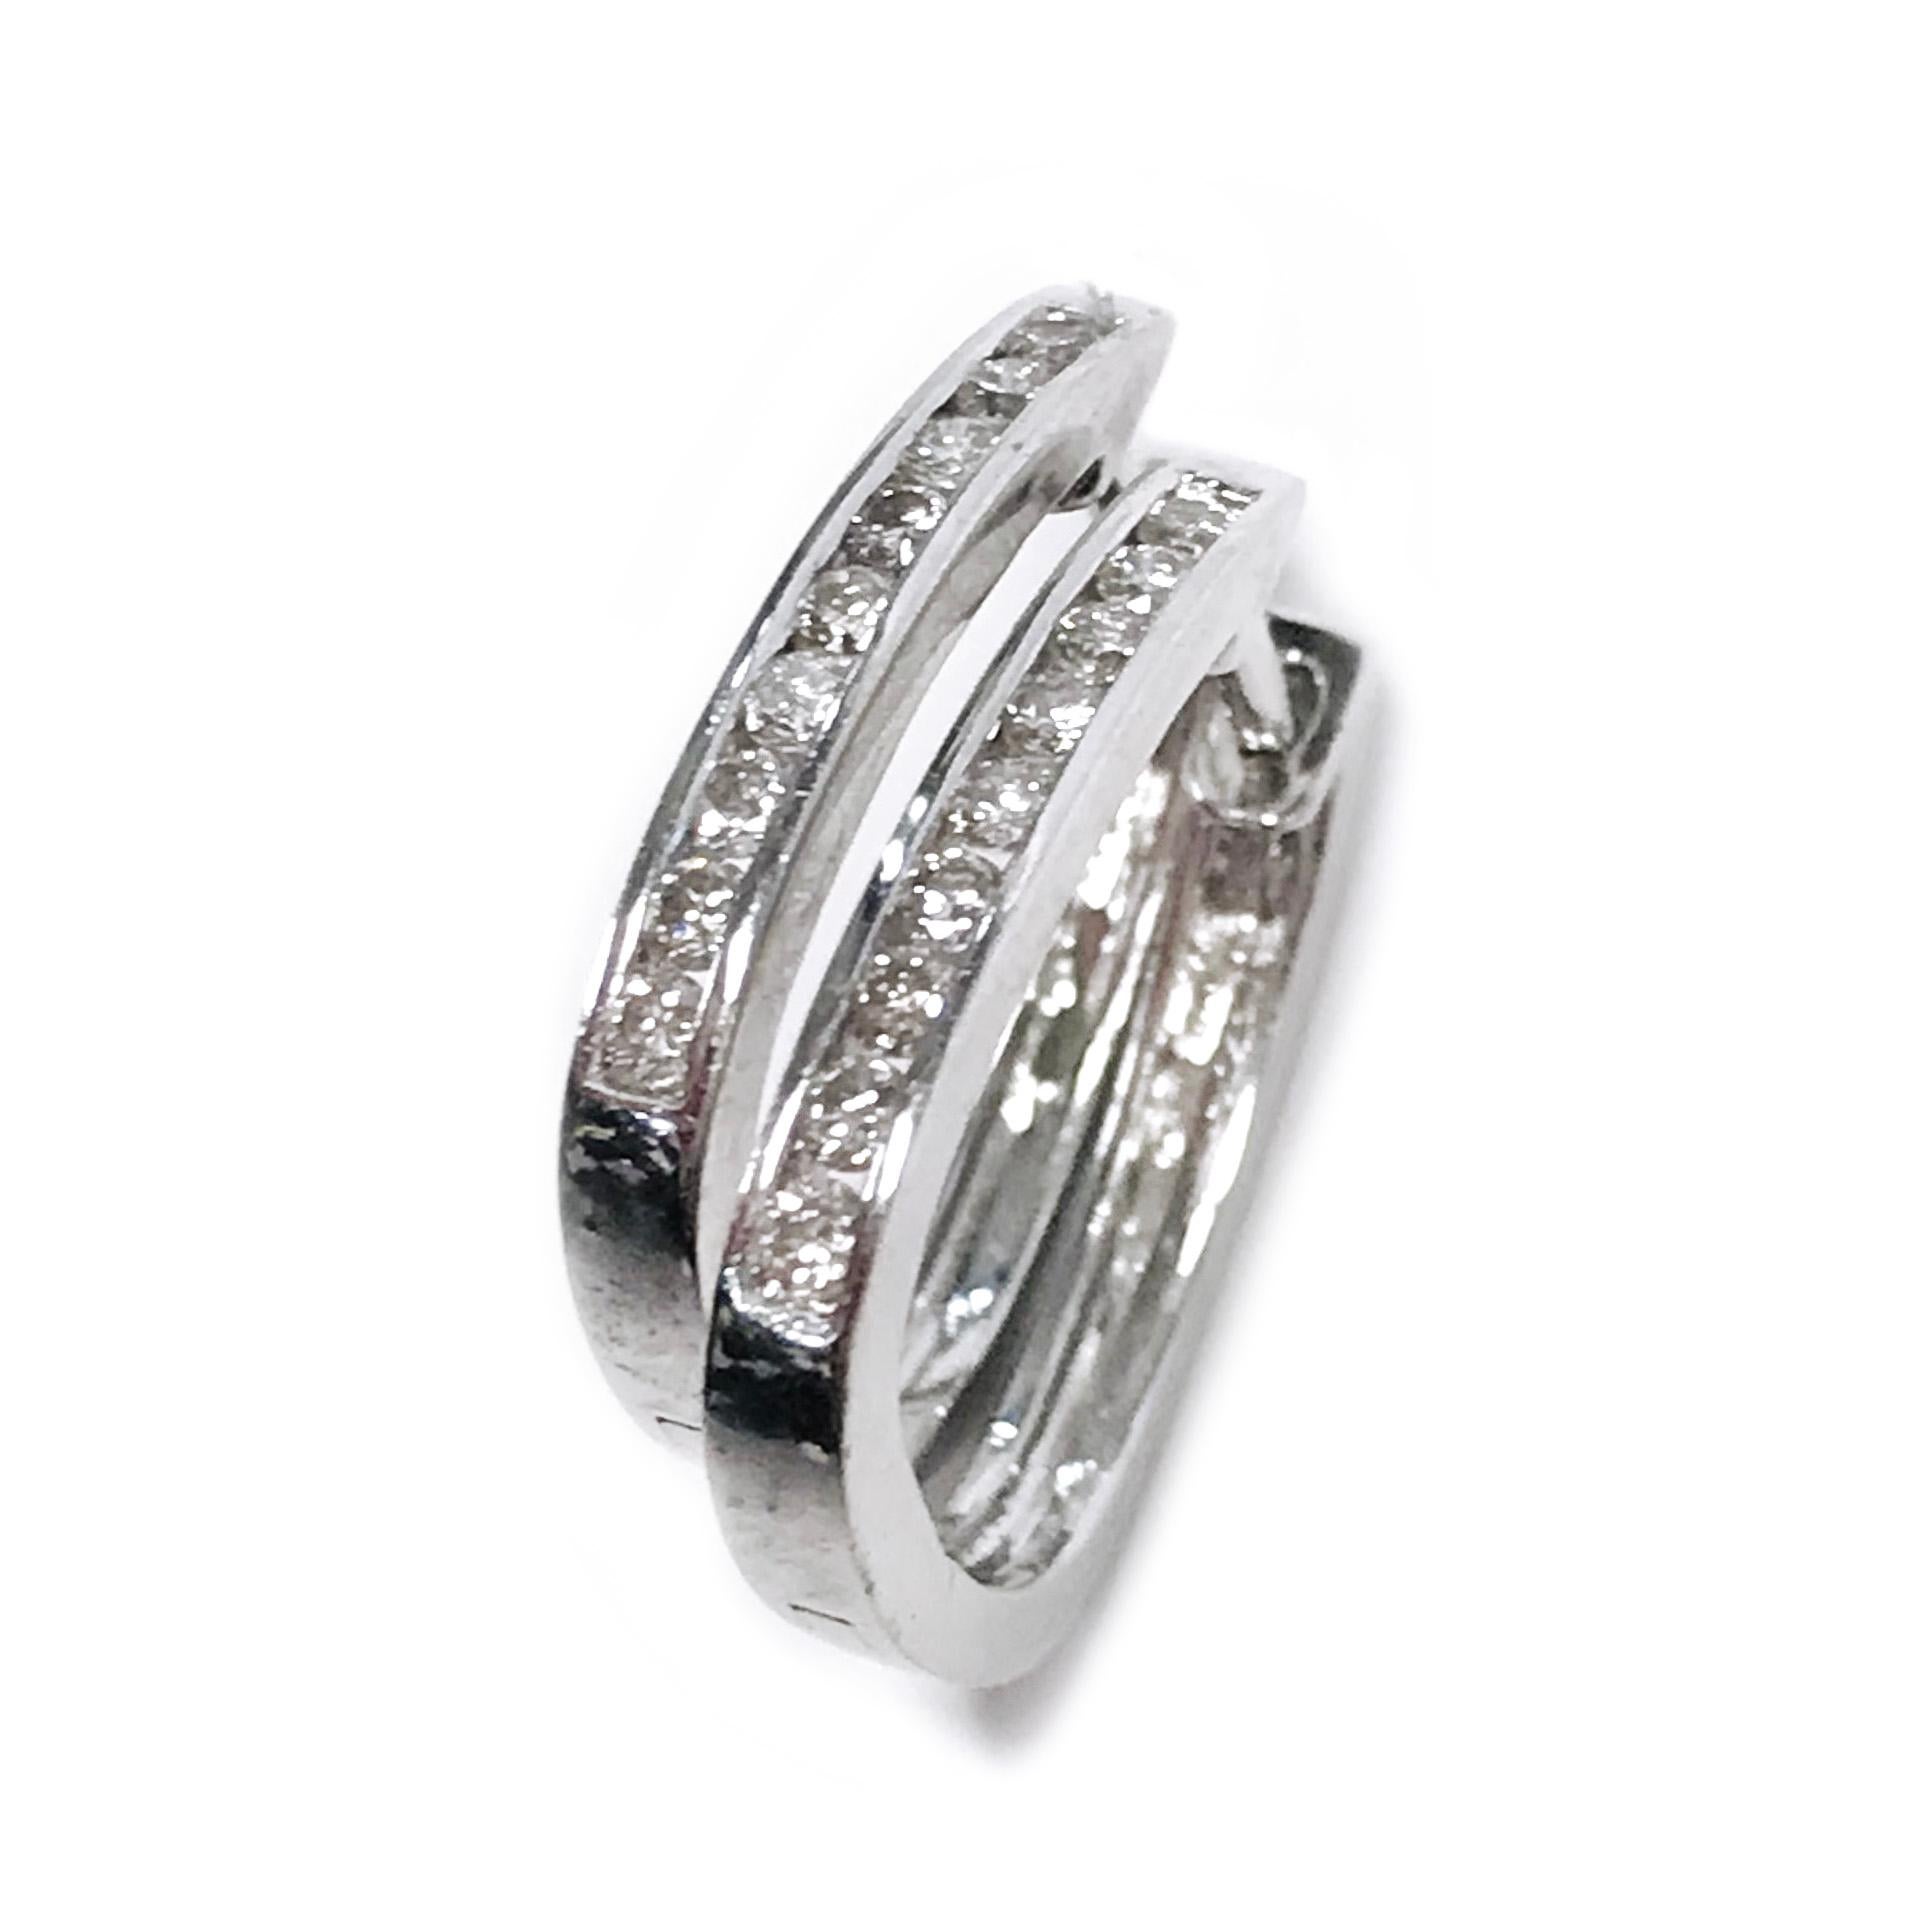 Sterling Silver Diamond Hoop Earrings. The petite earrings feature nine 1.5mm channel-set brilliant-cut round diamonds on each earring. The diamonds are SI1-SI2 (G.I.A.) in clarity and J-K (G.I.A.) in color. The total carat weight of the earrings is